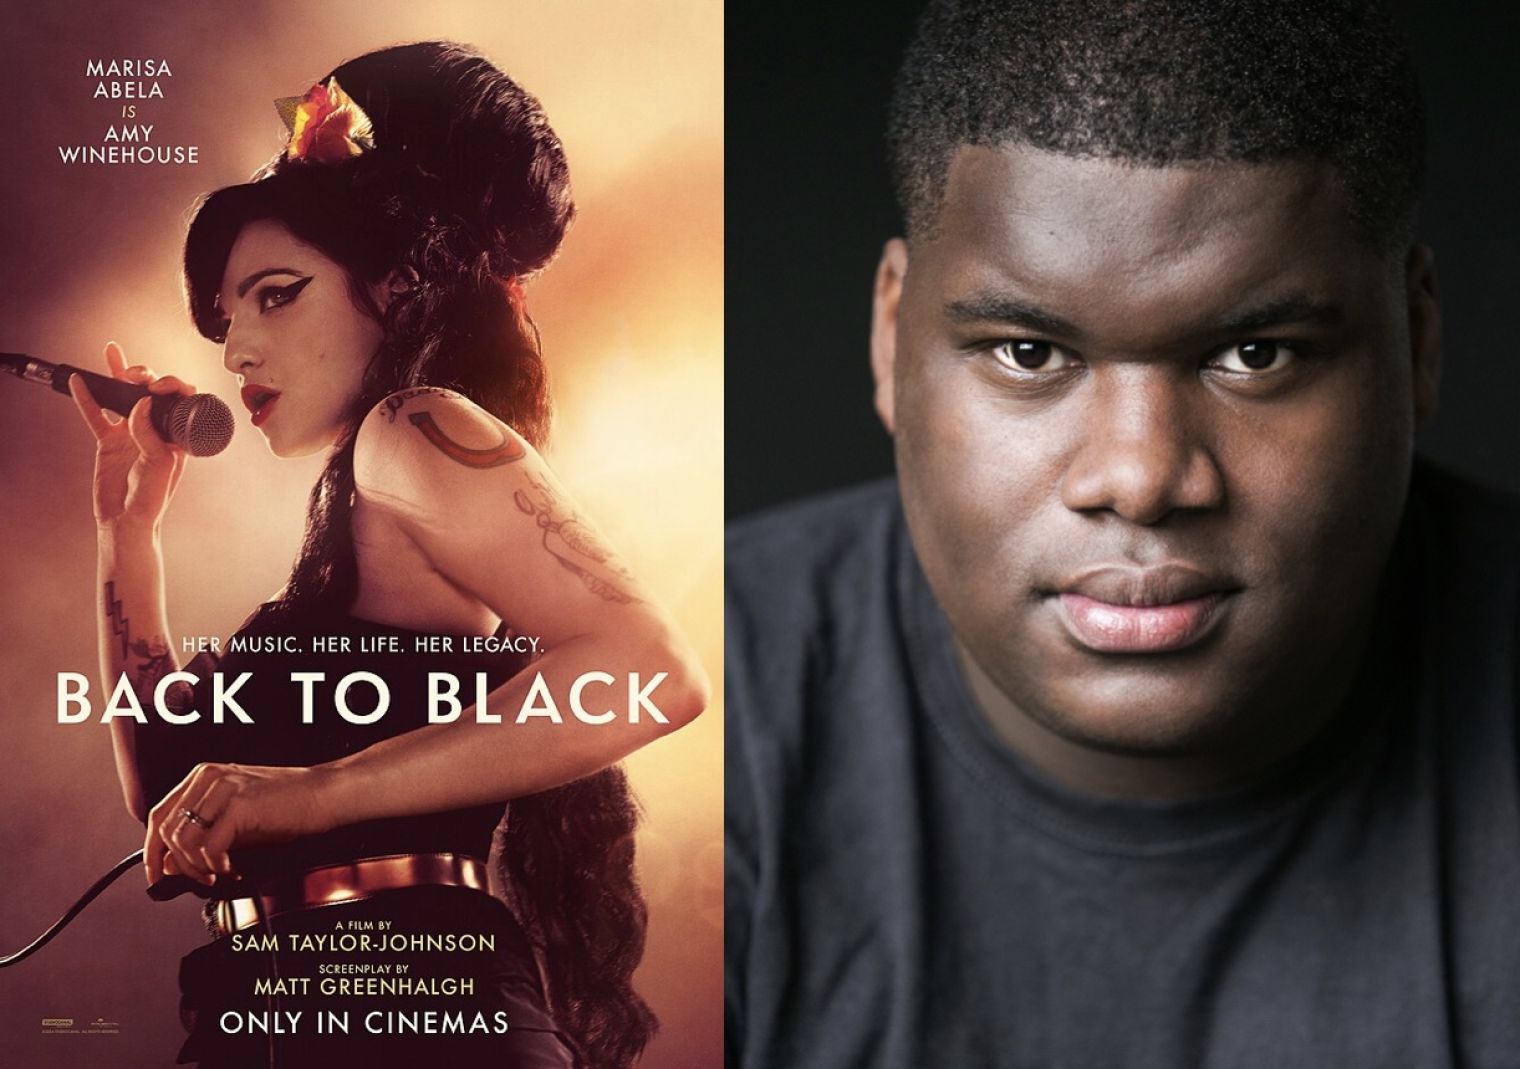 Tuwaine Barrett plays renowned music producer Salaam Remi in the Amy Winehouse biopic ‘Back to Black’ which is out in UK cinemas tomorrow